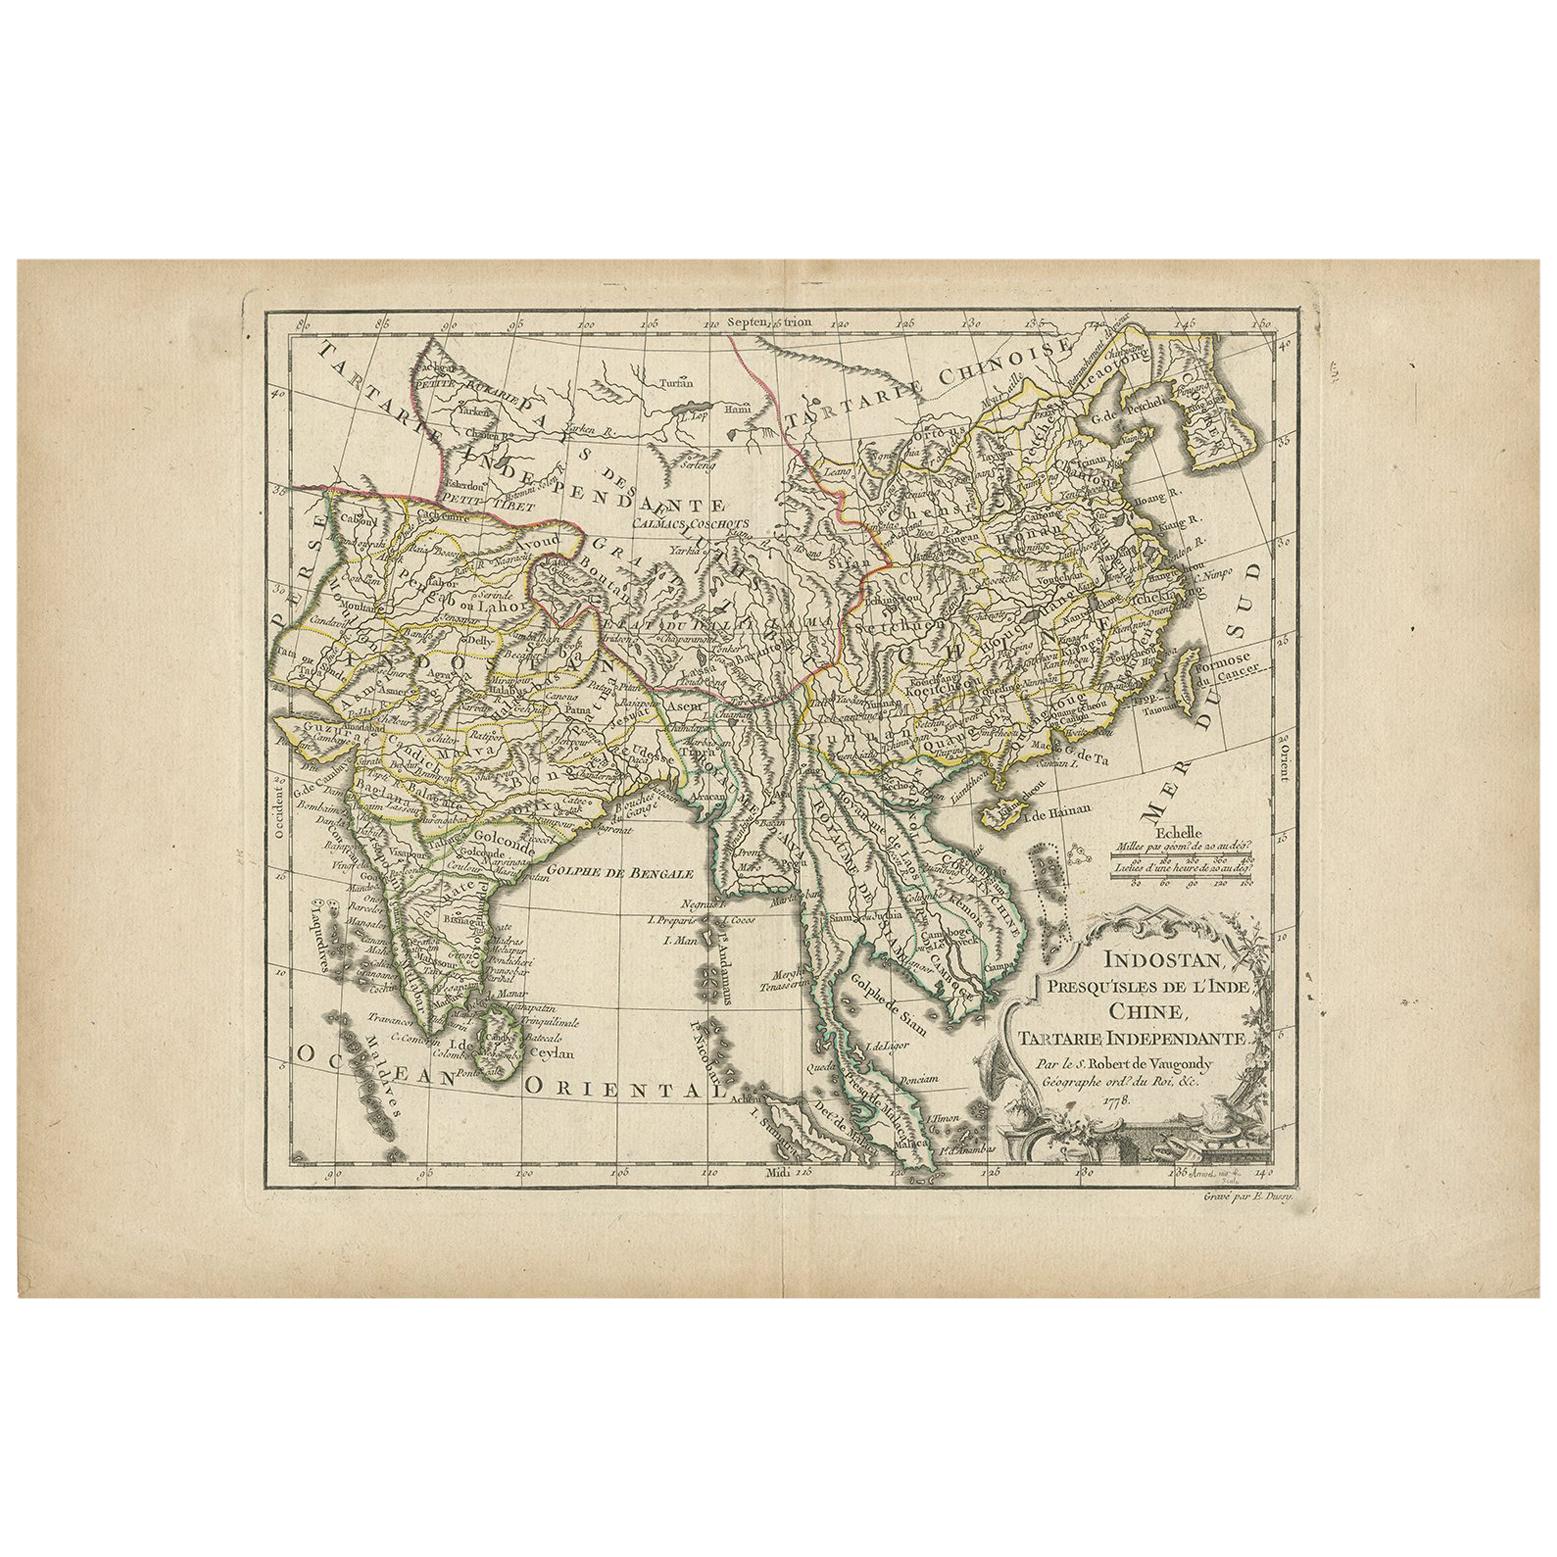 Antique Map of Asia by Dussy, 1778